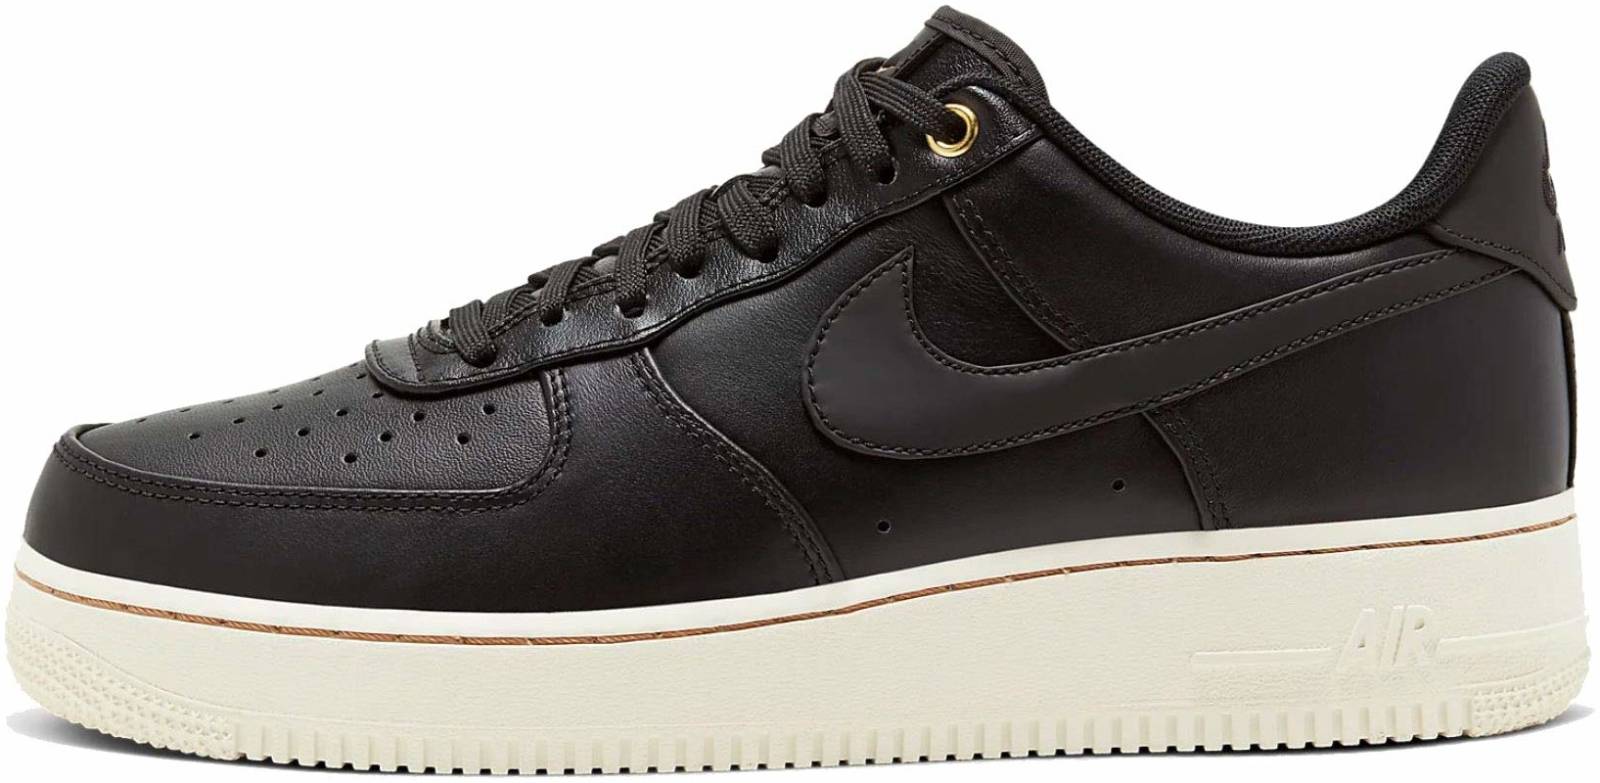 8 Reasons to/NOT to Buy Nike Air Force 1 Premium (Aug 2021 ...